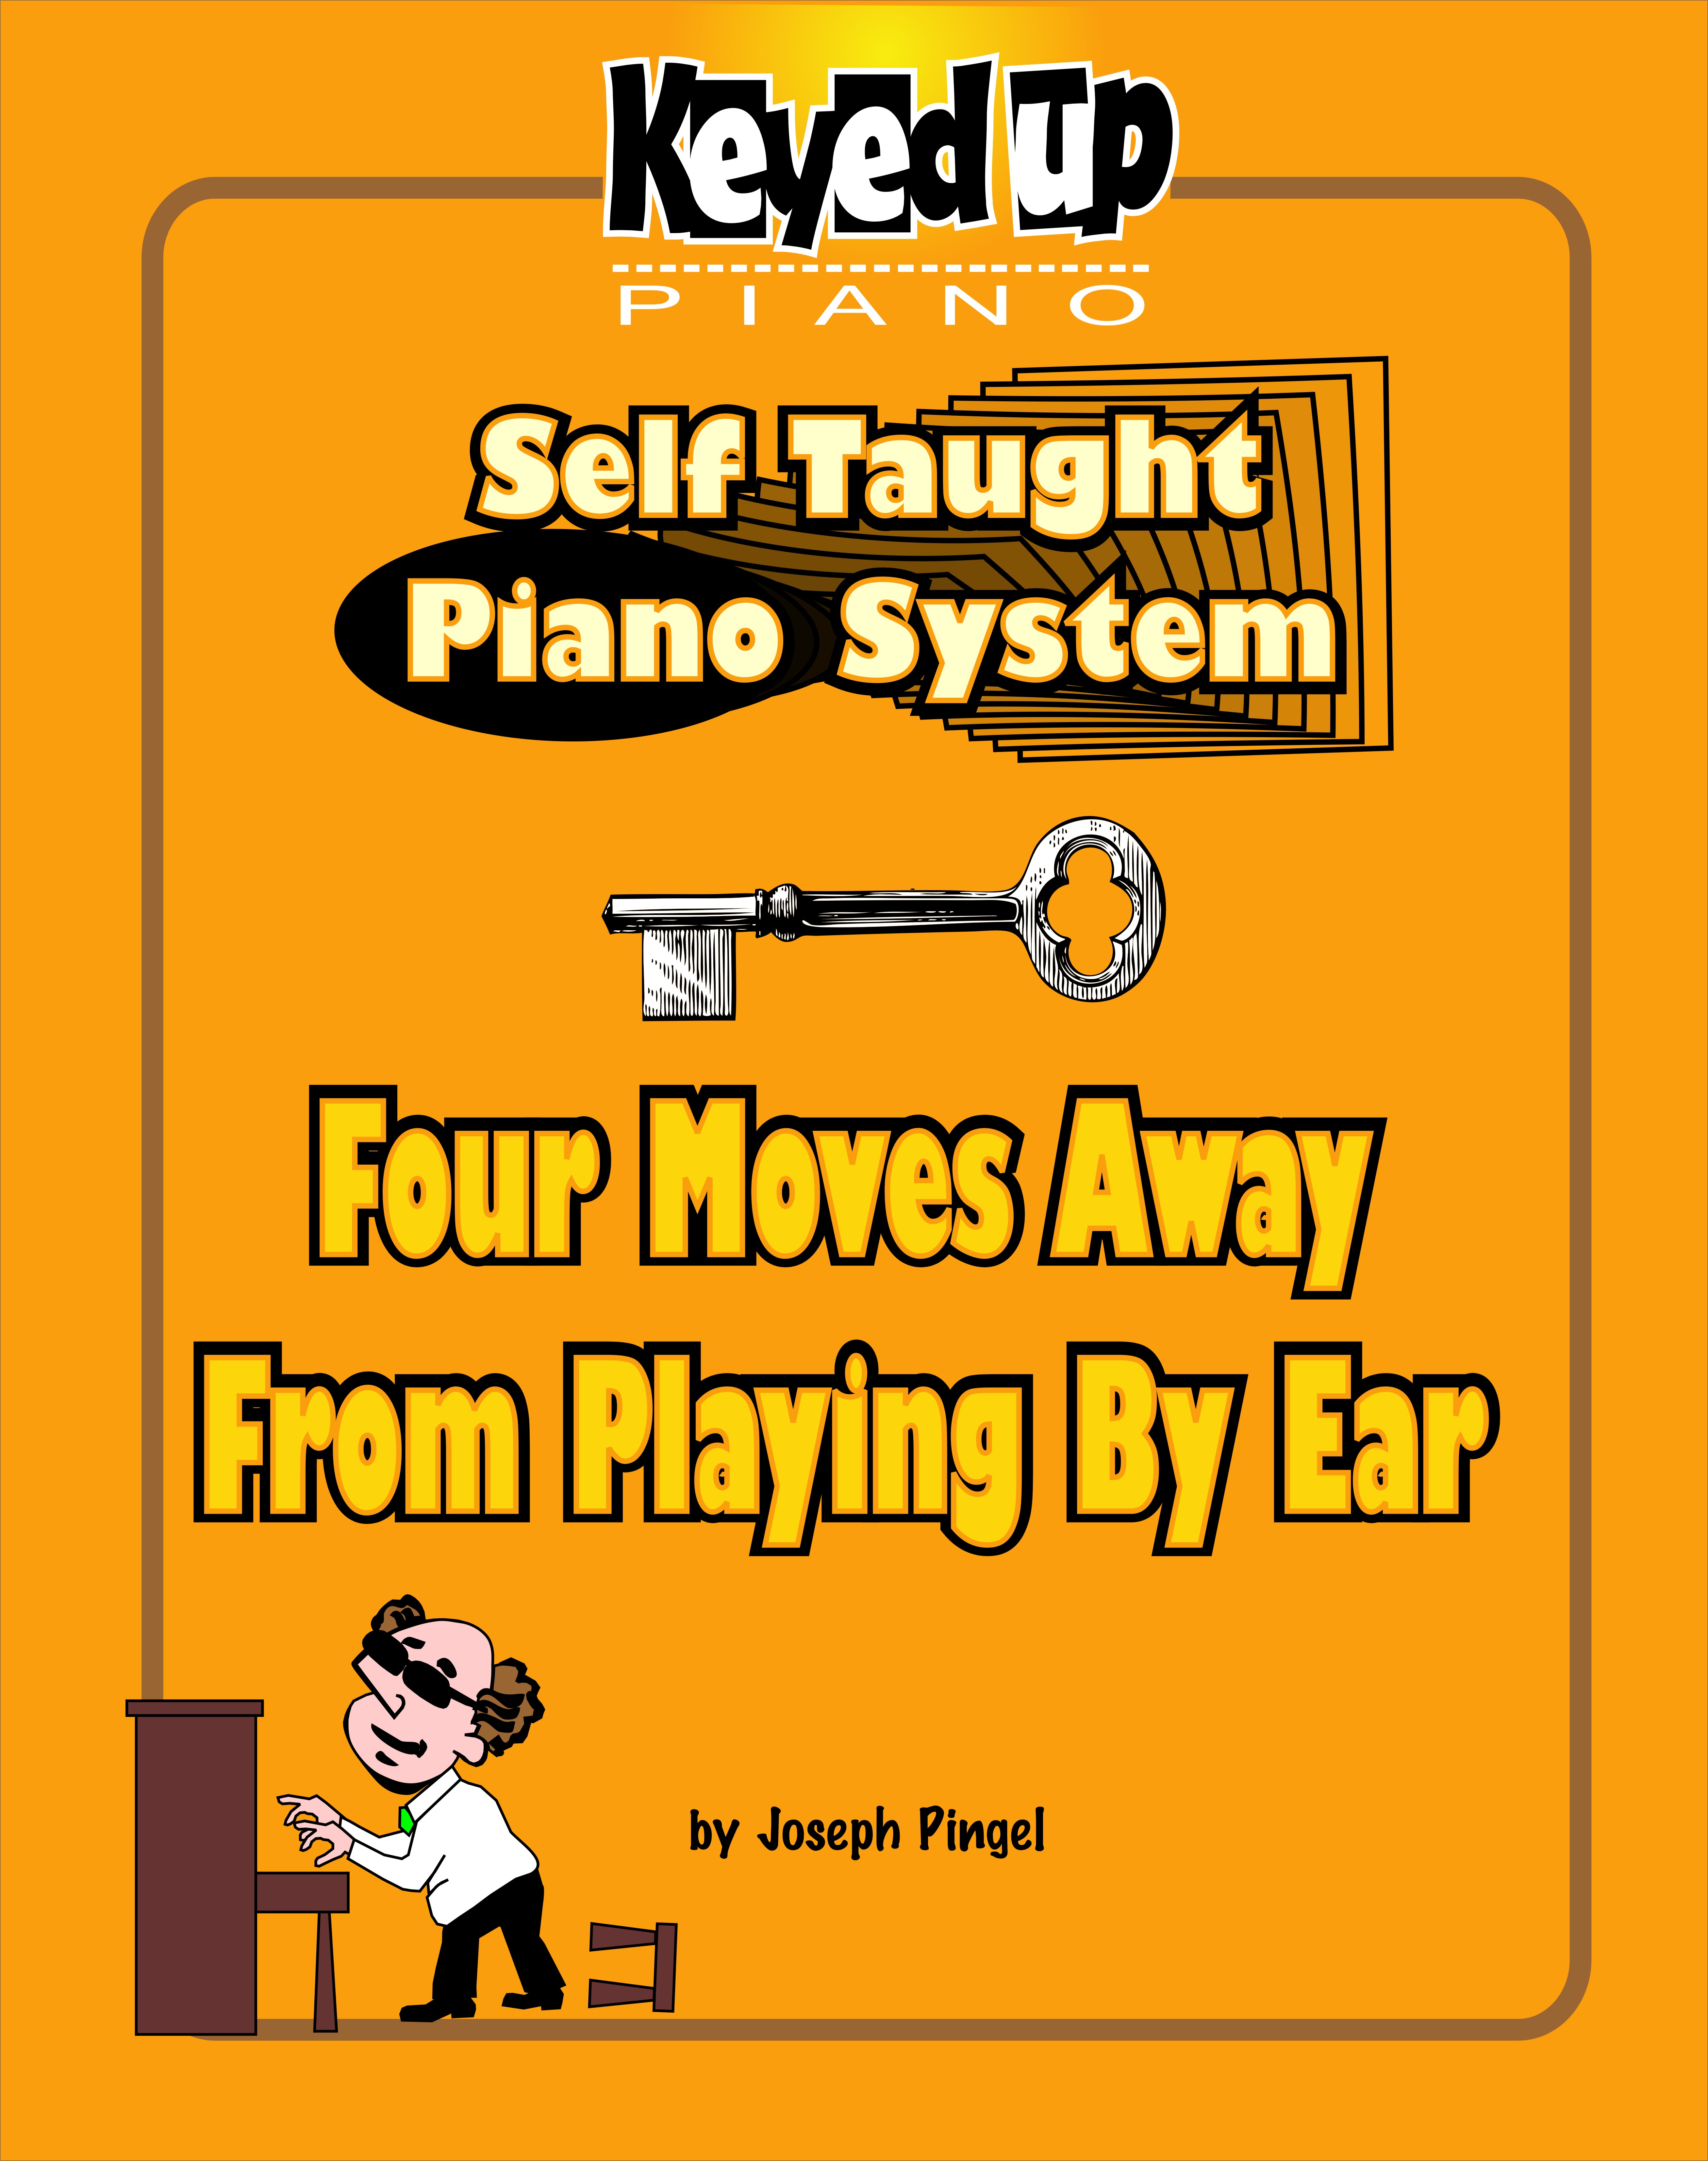 Free Lessons - Playing Piano By Ear